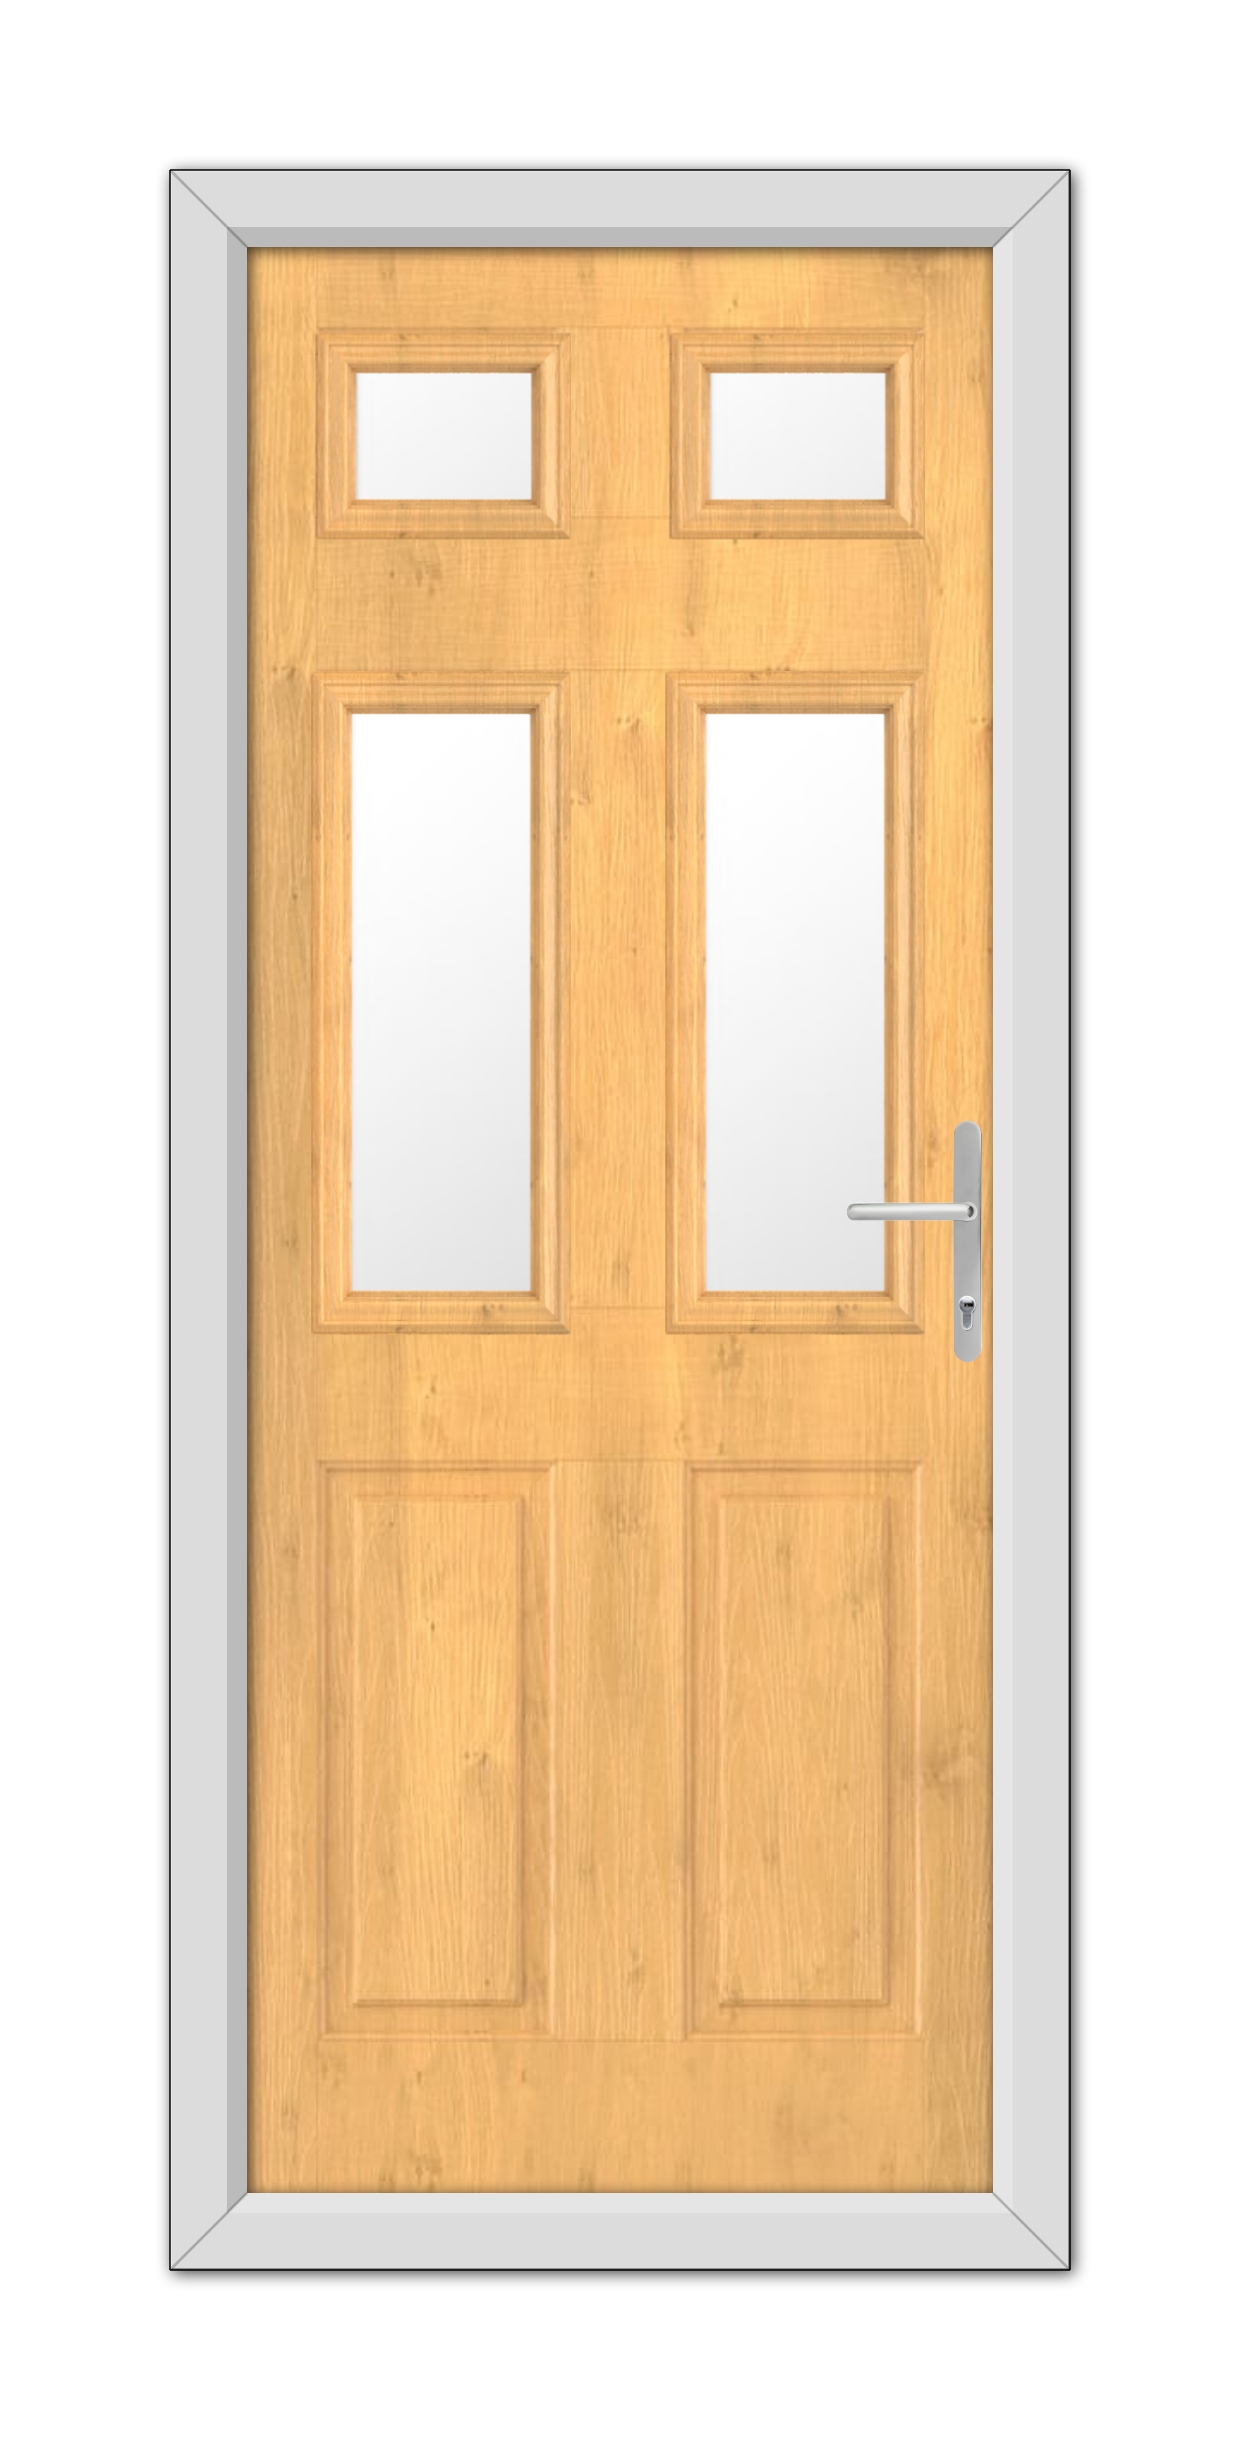 A Irish Oak Middleton Glazed 4 Composite Door 48mm Timber Core with glass panels, a metal handle, and a frame, isolated on a white background.